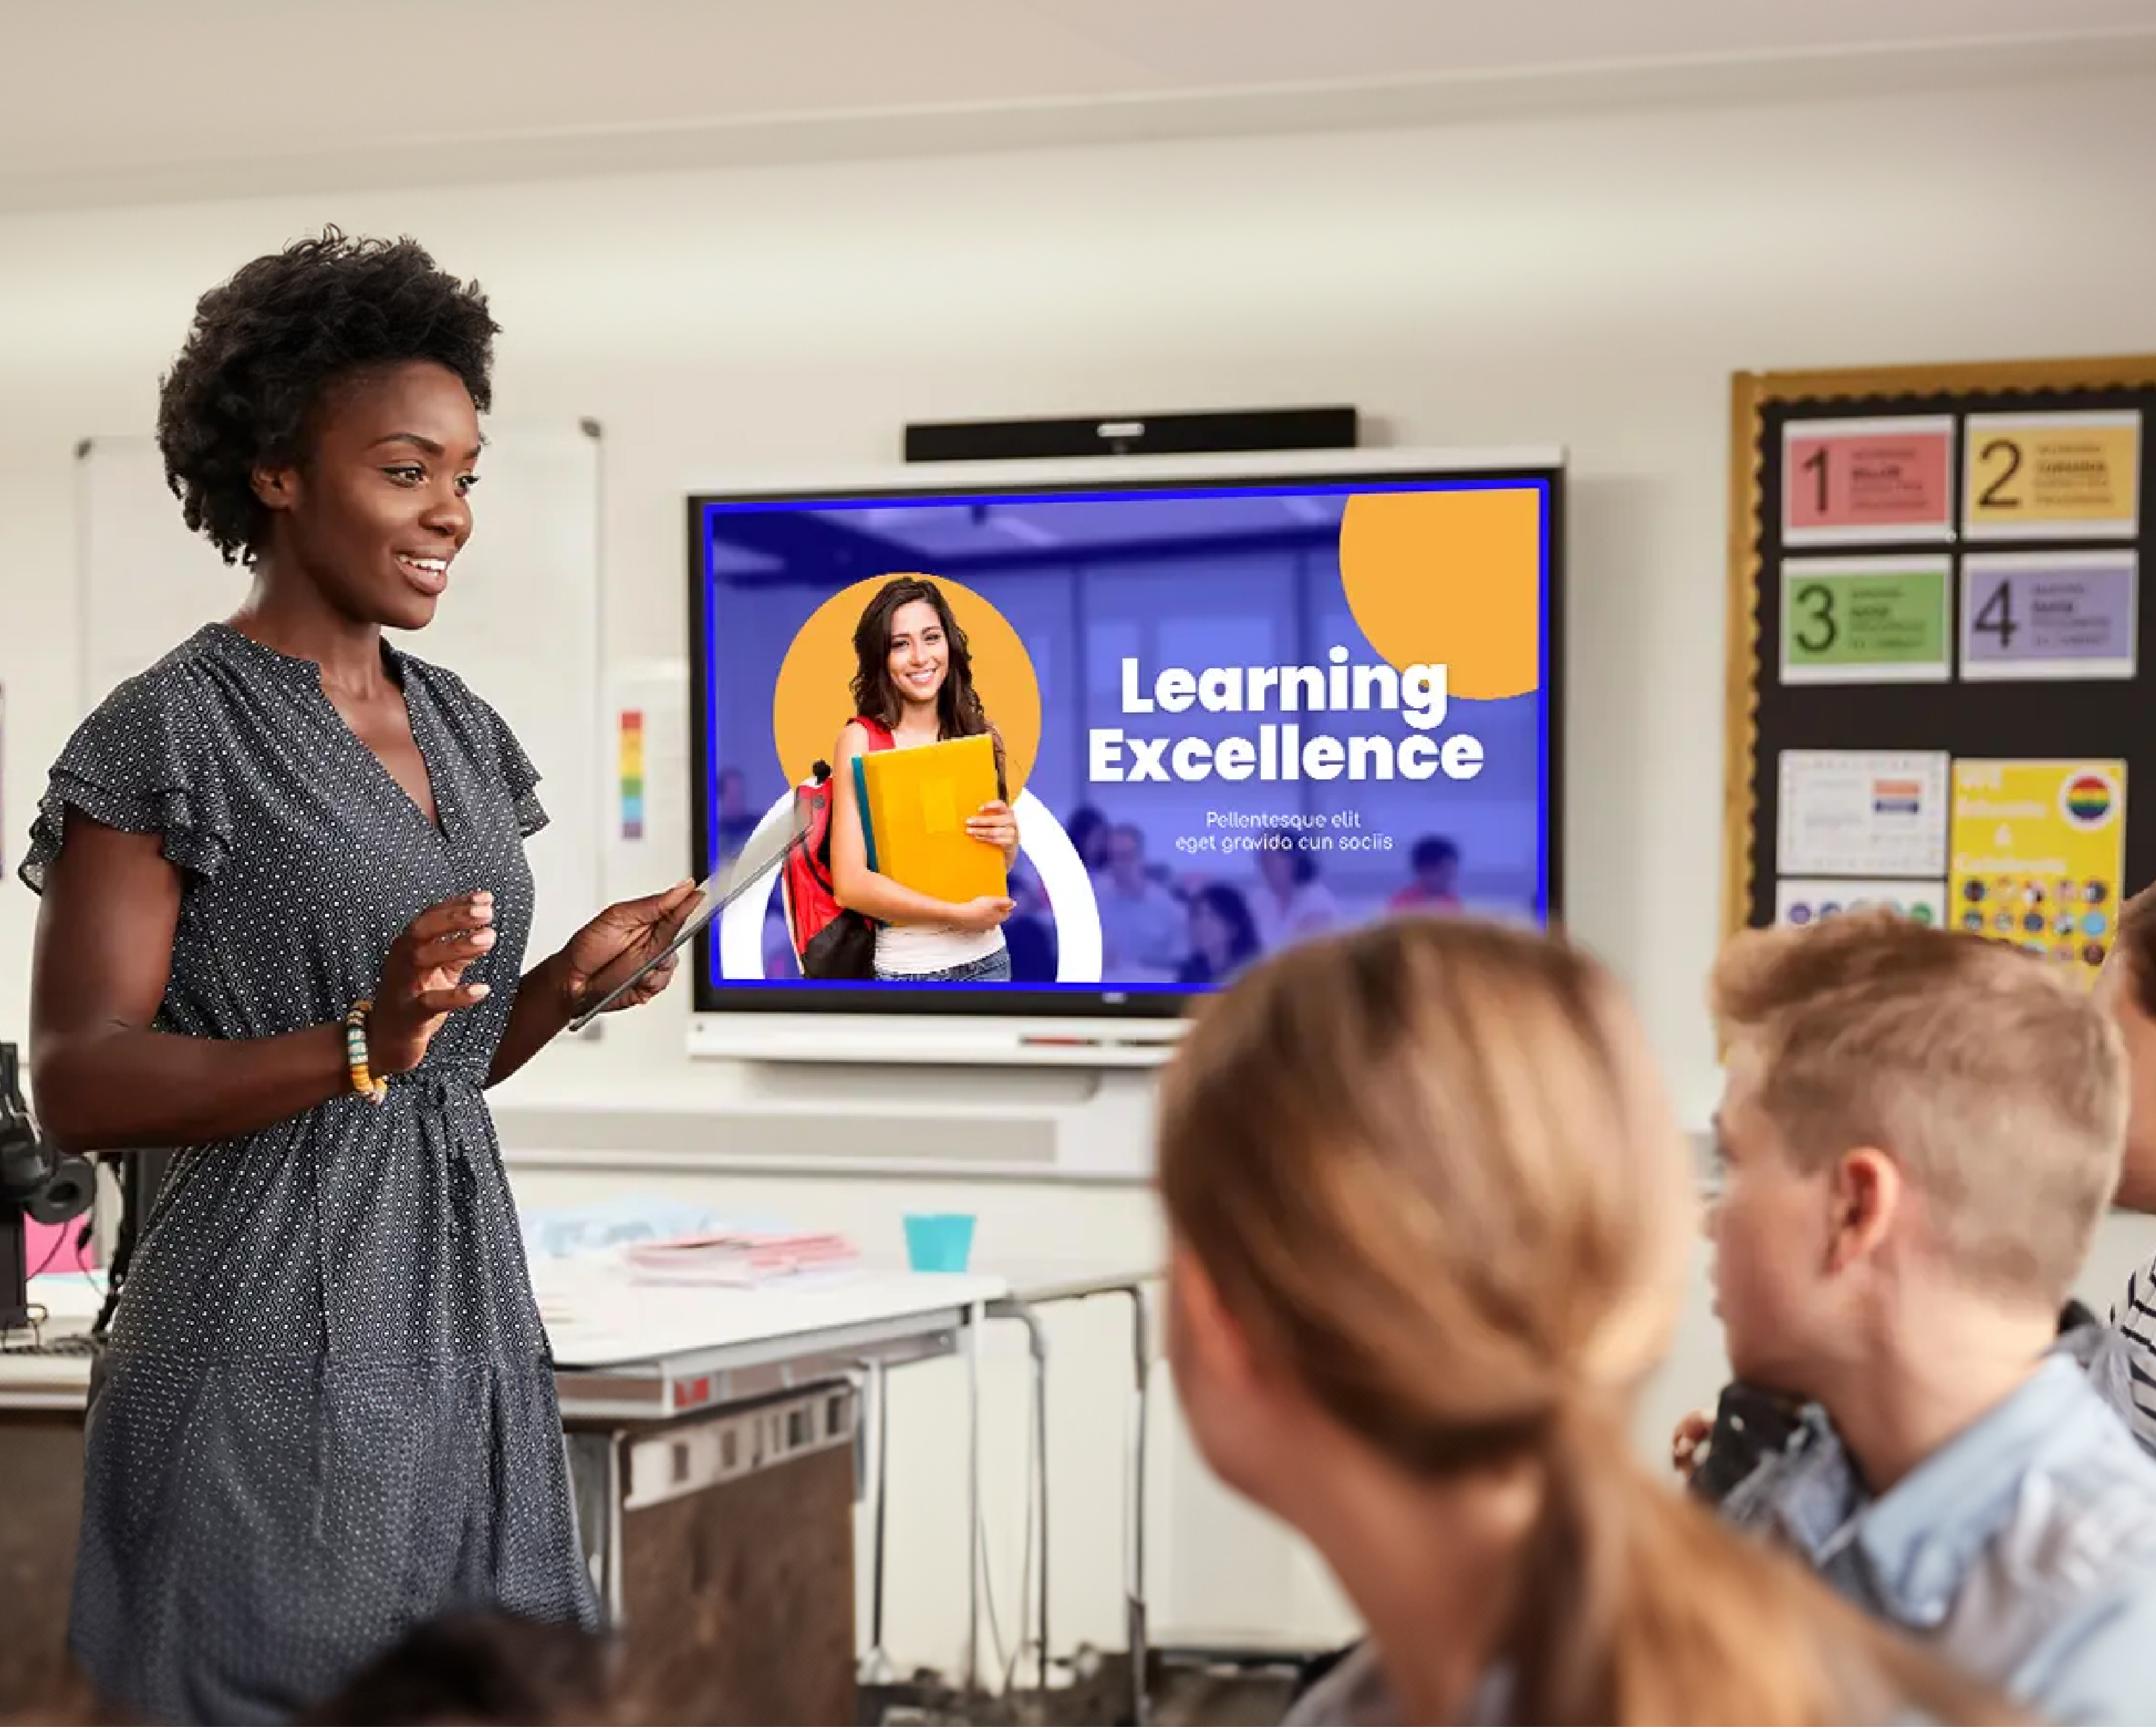 Enhancing Learning Environments: Digital Signage in Education